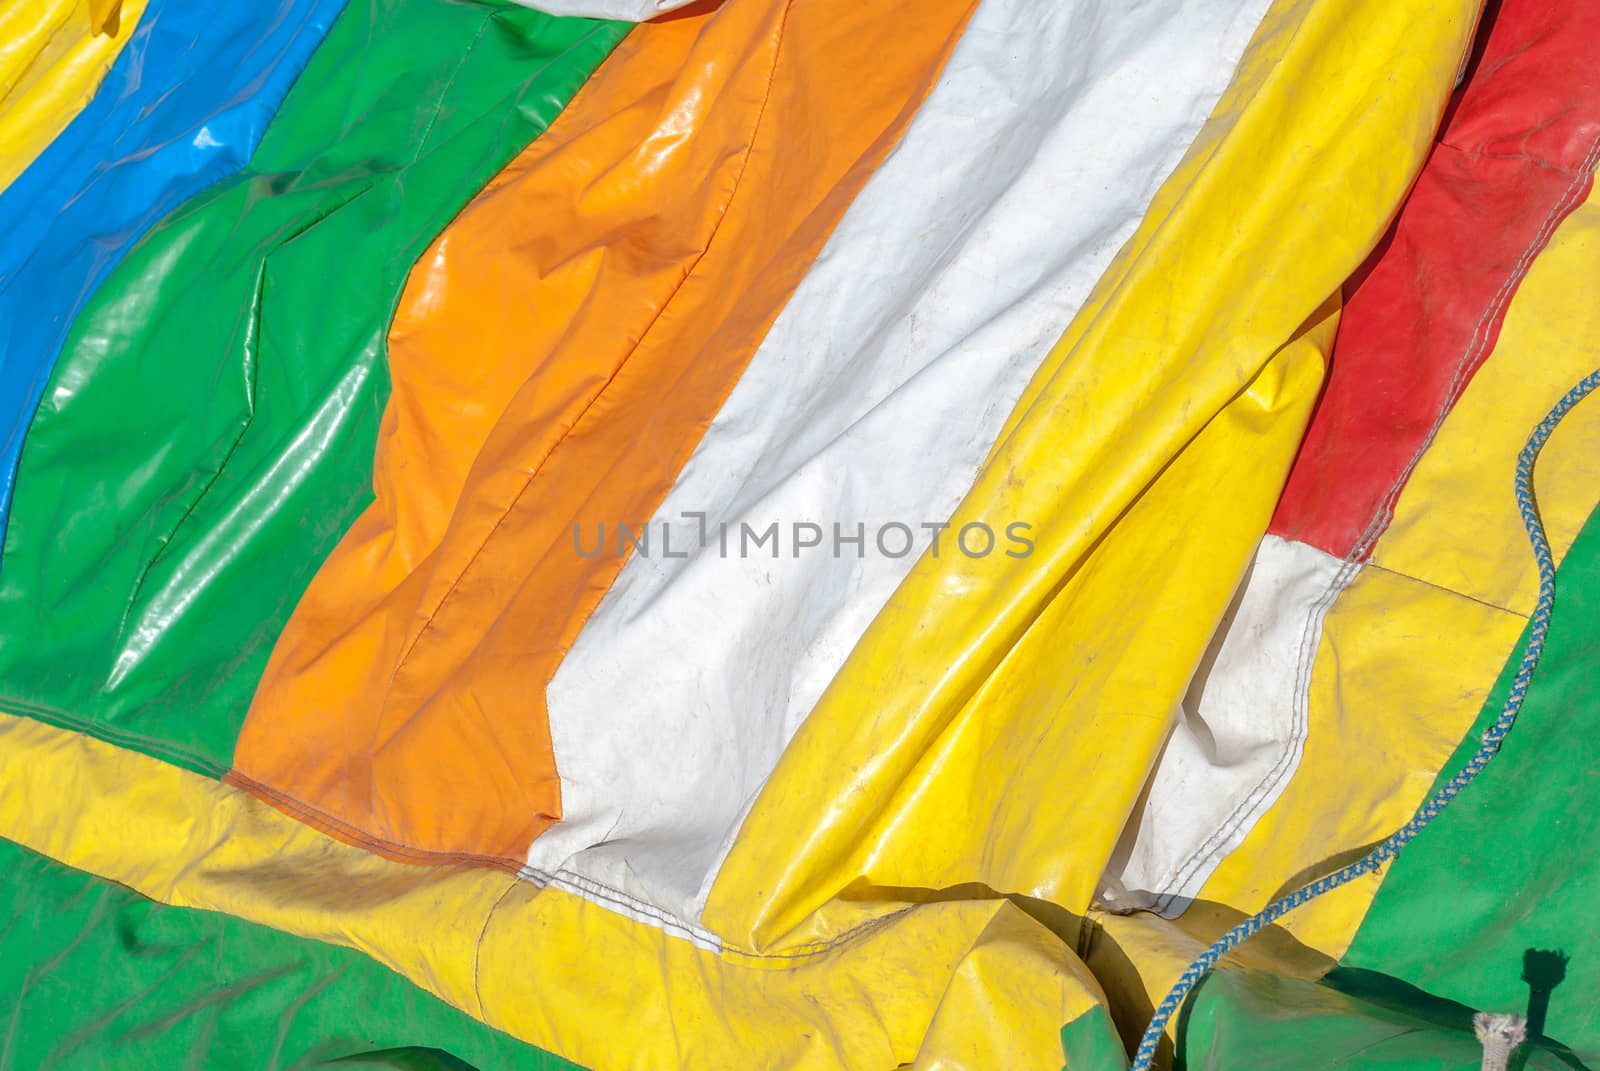 rumpled colored rubber gloth, inflatable attraction, a beautiful sunny day